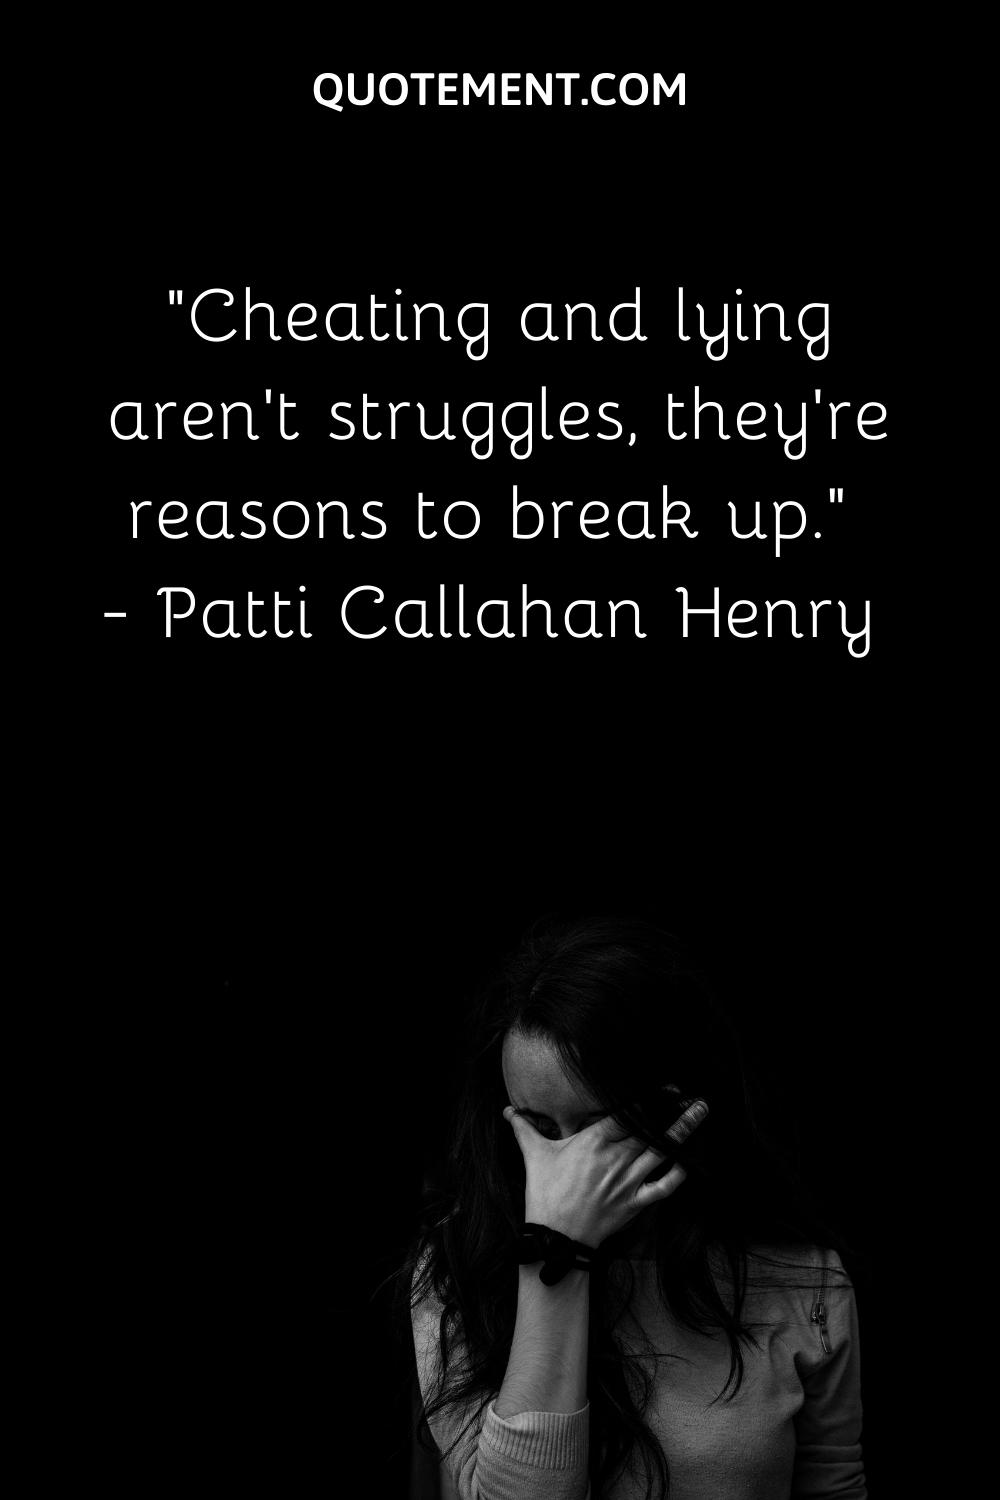 Cheating and lying aren’t struggles, they’re reasons to break up